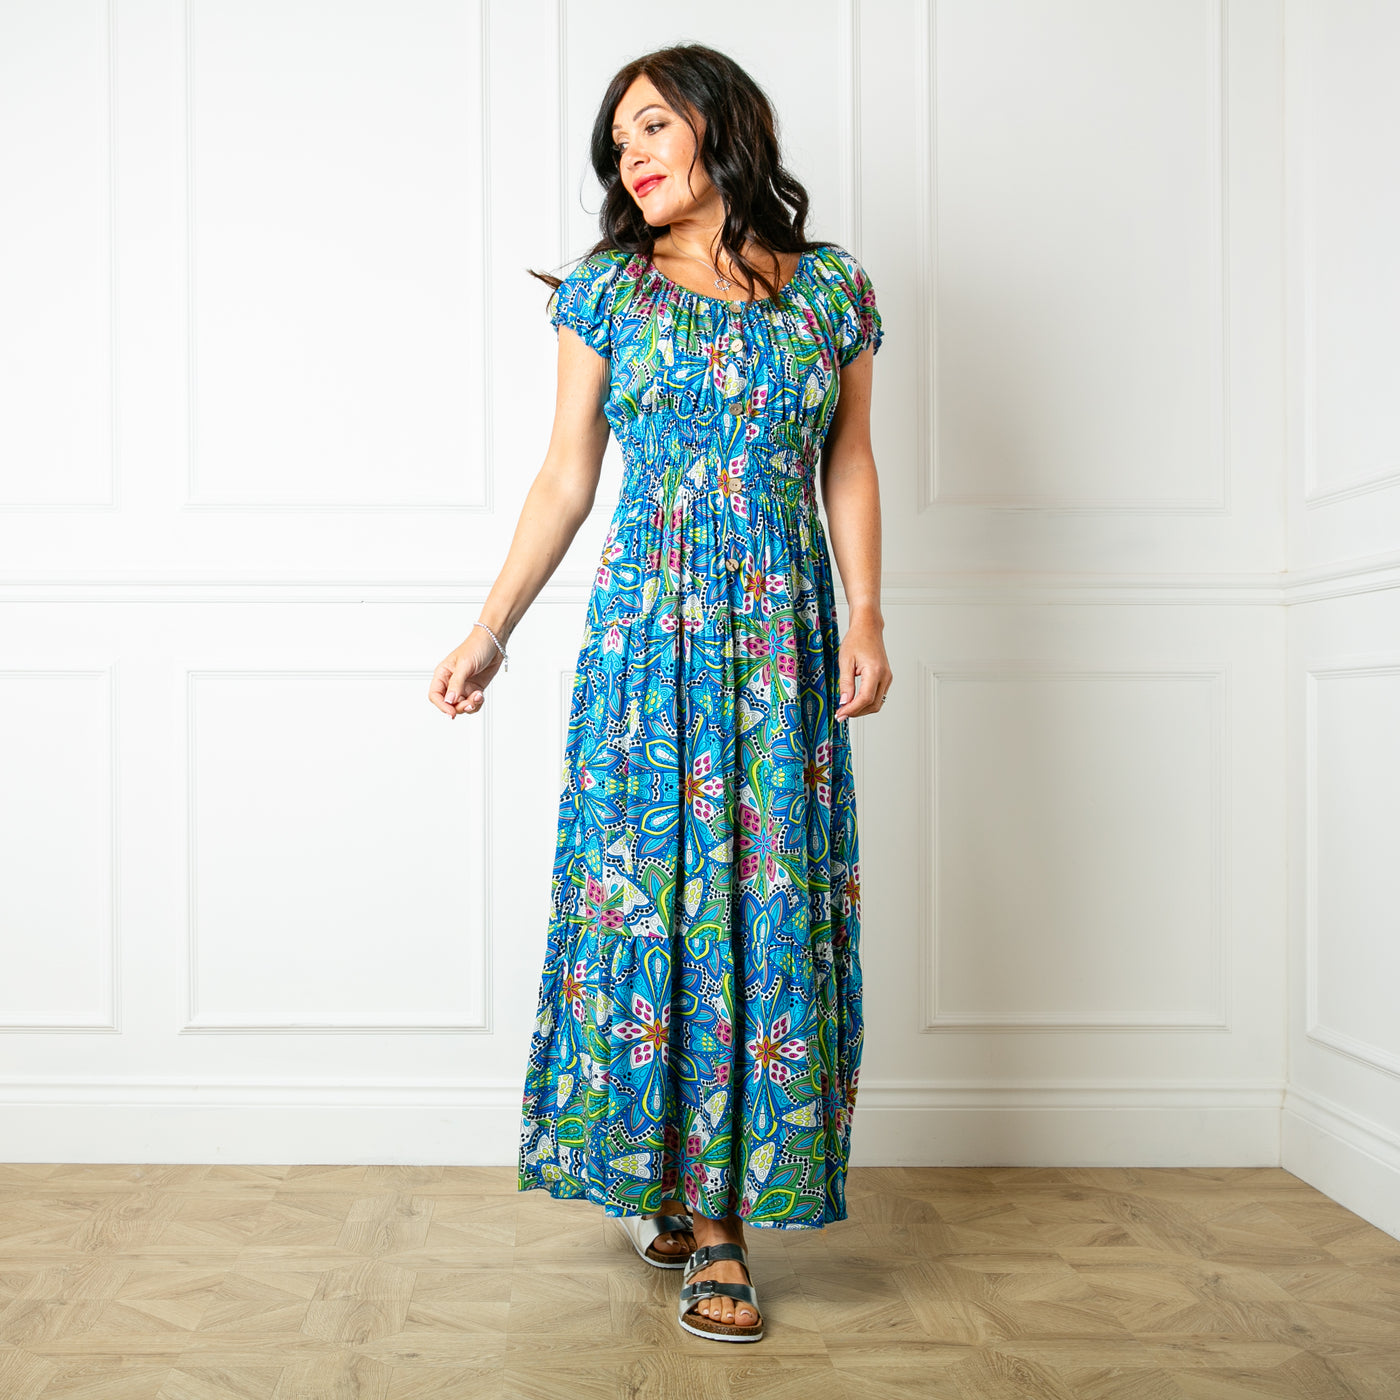 The blue Printed Button Maxi Dress with a maxi tiered skirt in a fun summery pattern